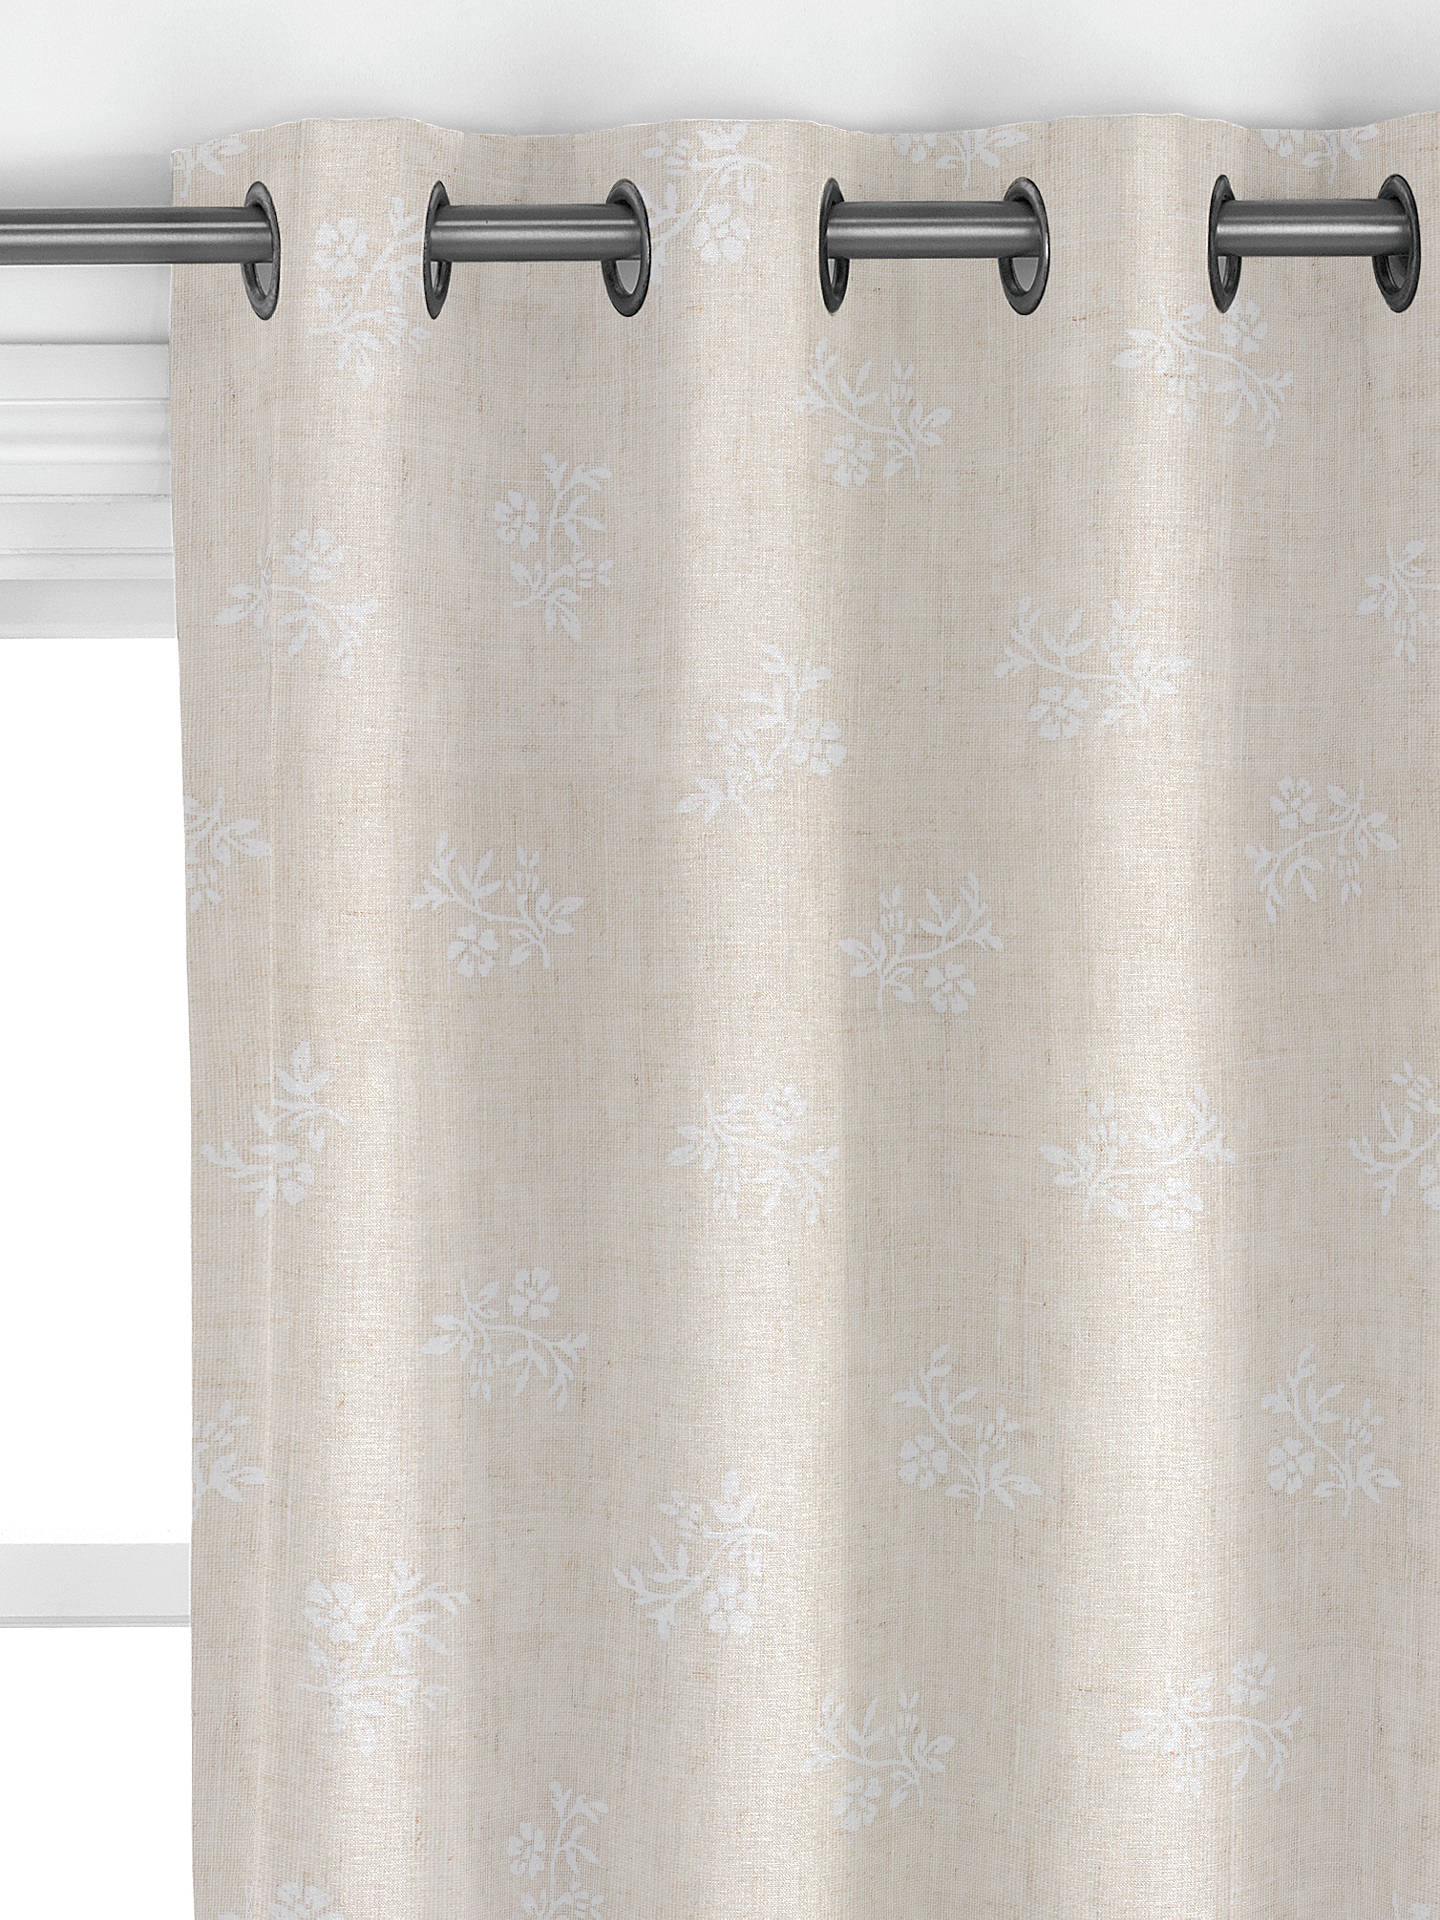 John Lewis & Partners Mereille Print Made to Measure Curtains, Greige